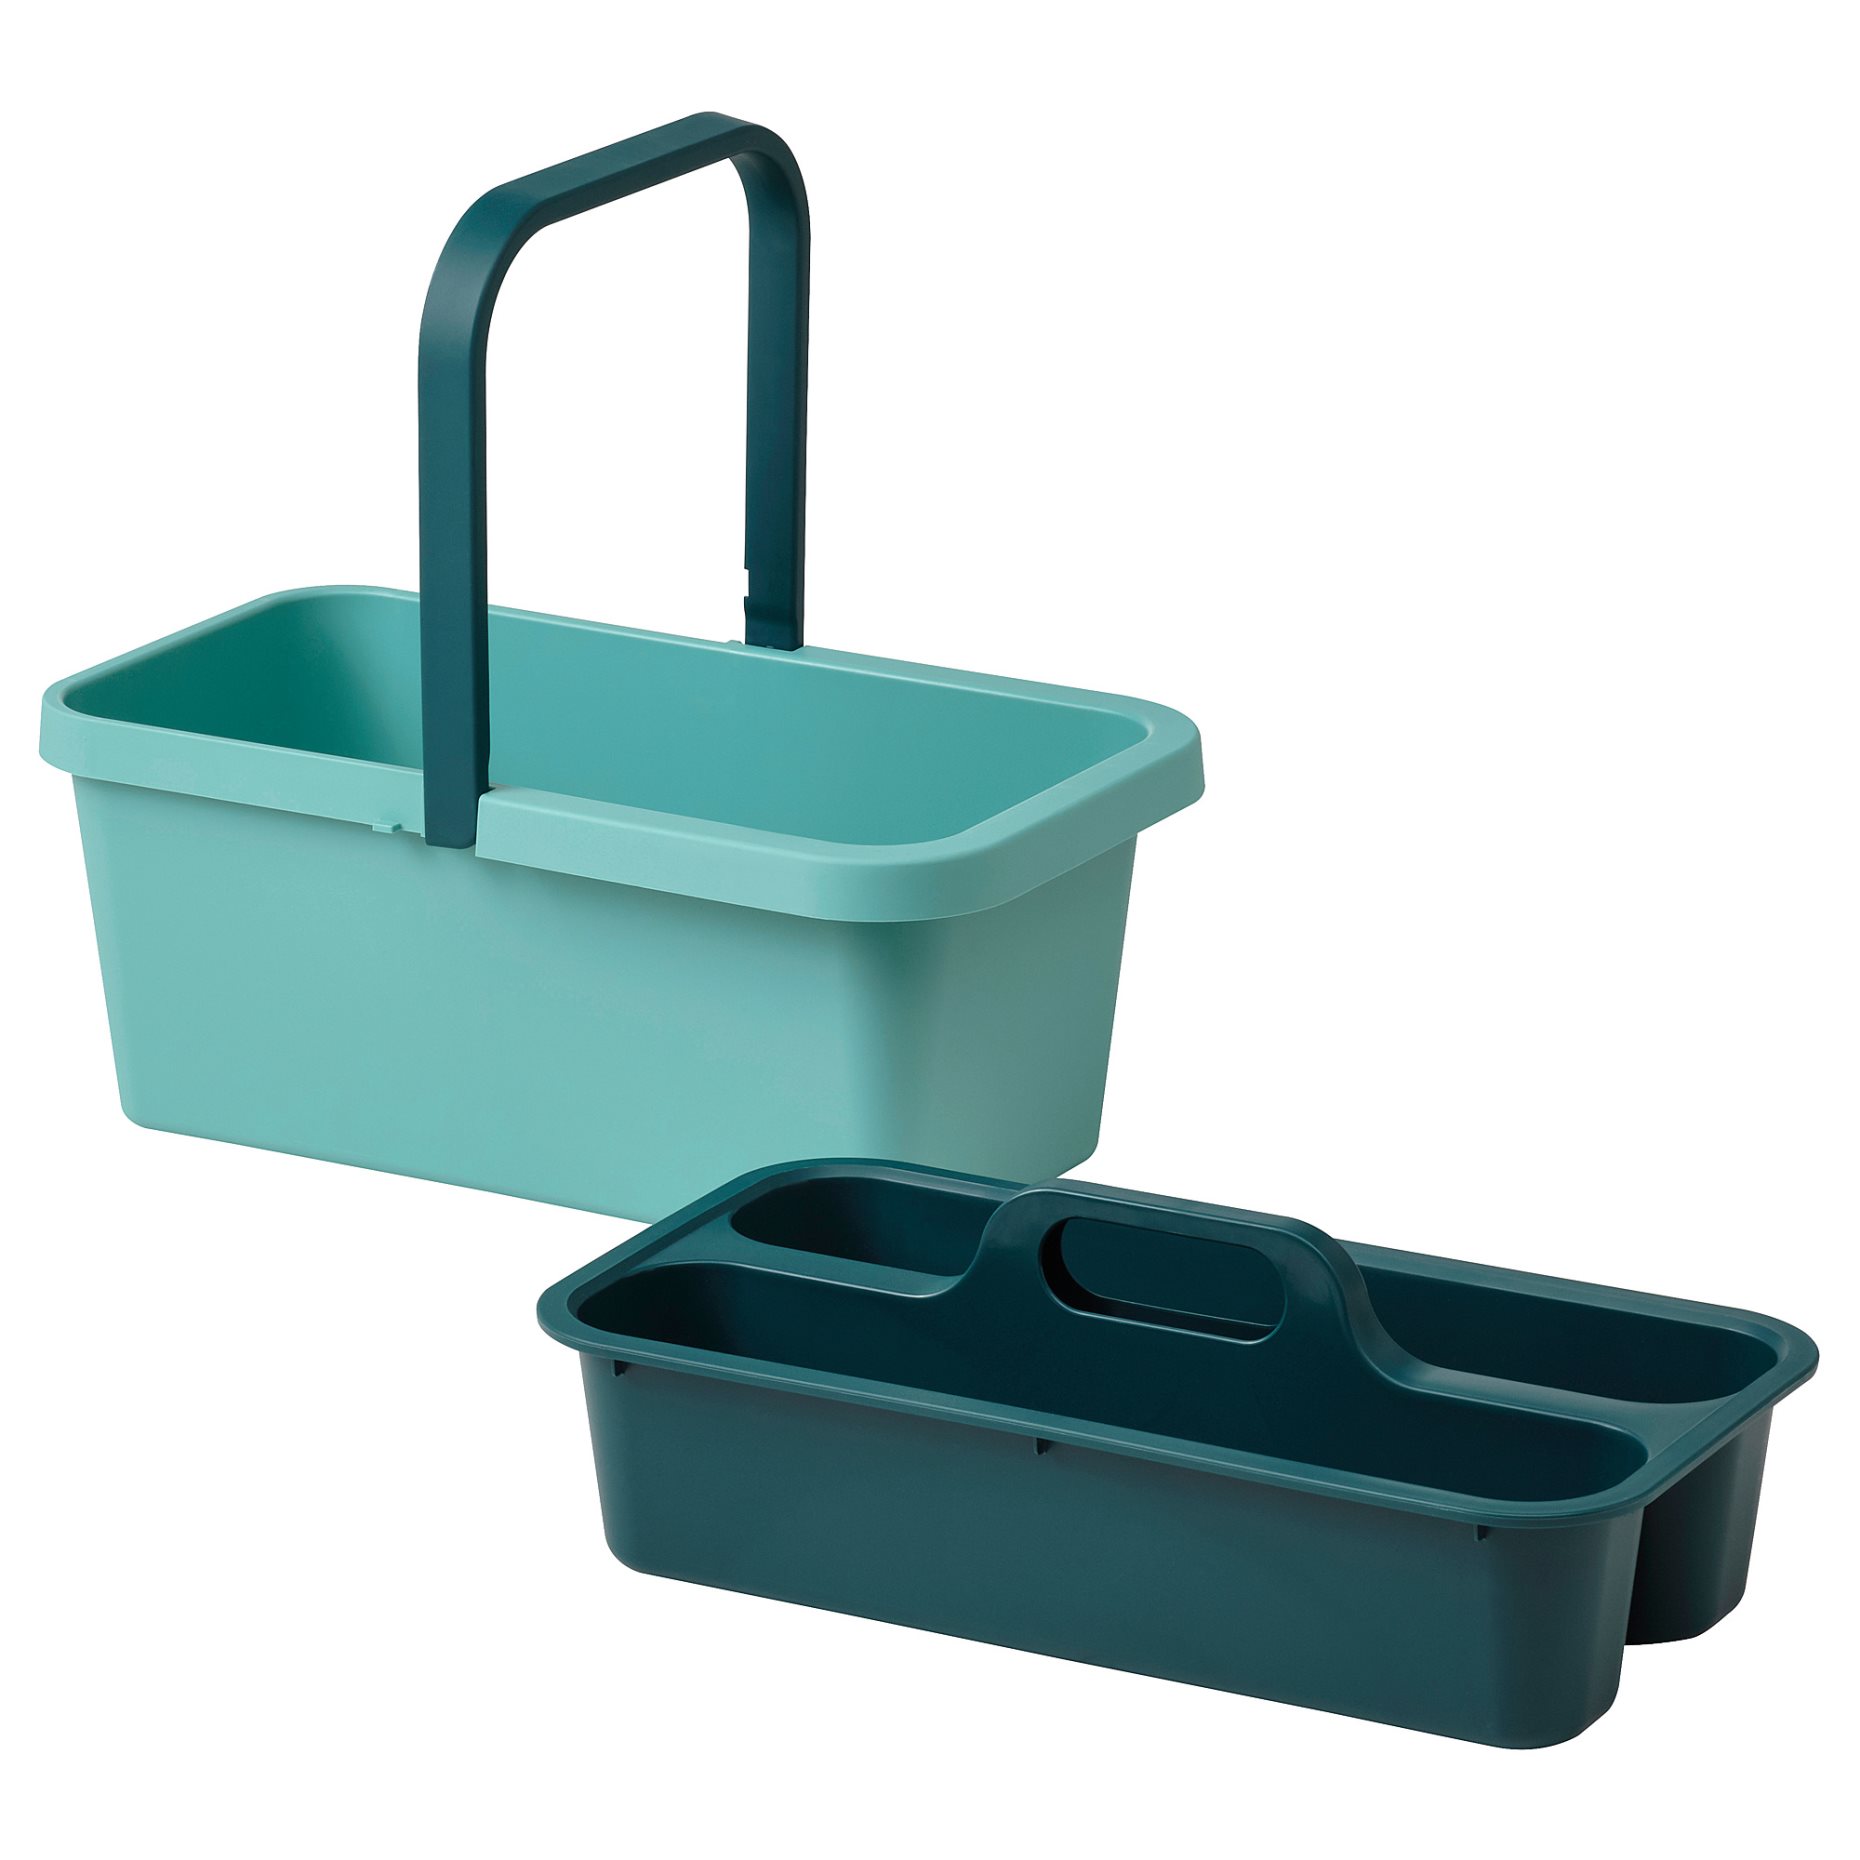 PEPPRIG, cleaning bucket and caddy, 604.995.72